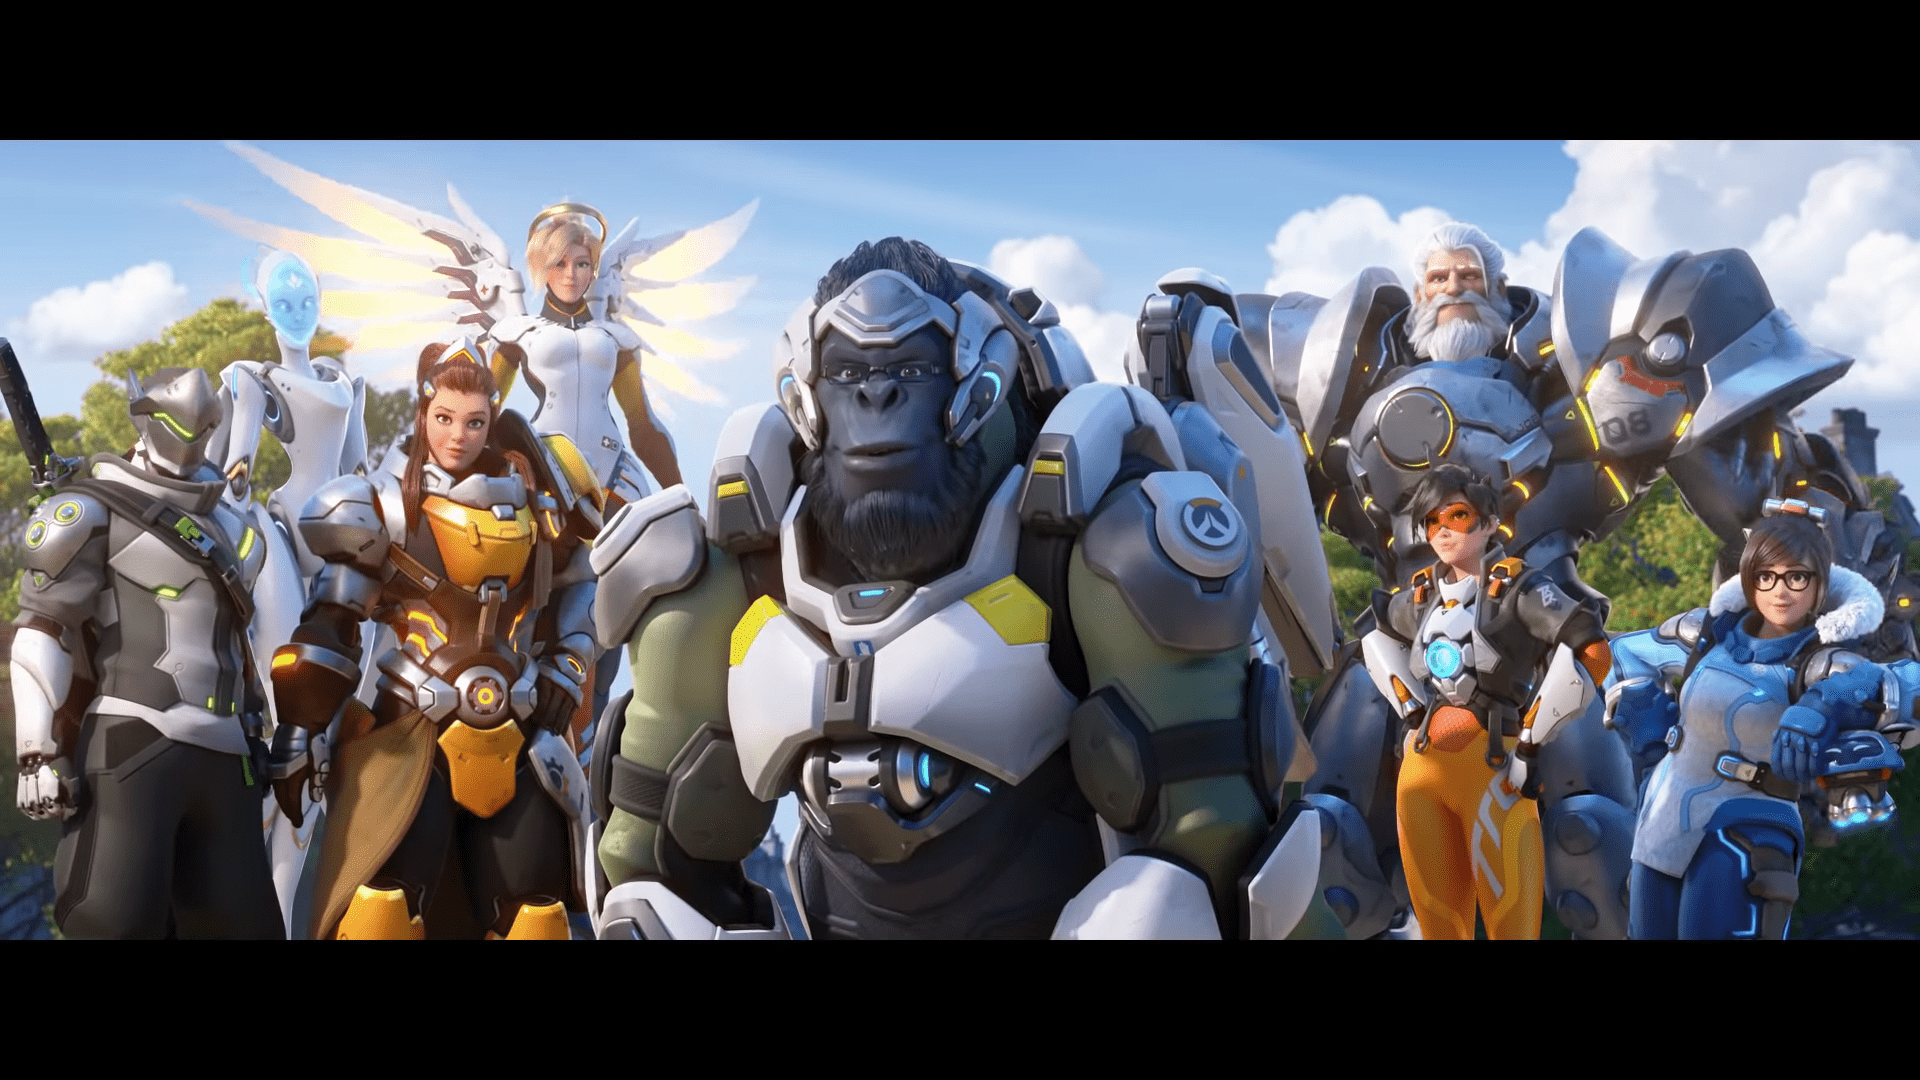 Overwatch Updates To Allow Ranked Open Queue Along With Role Queue